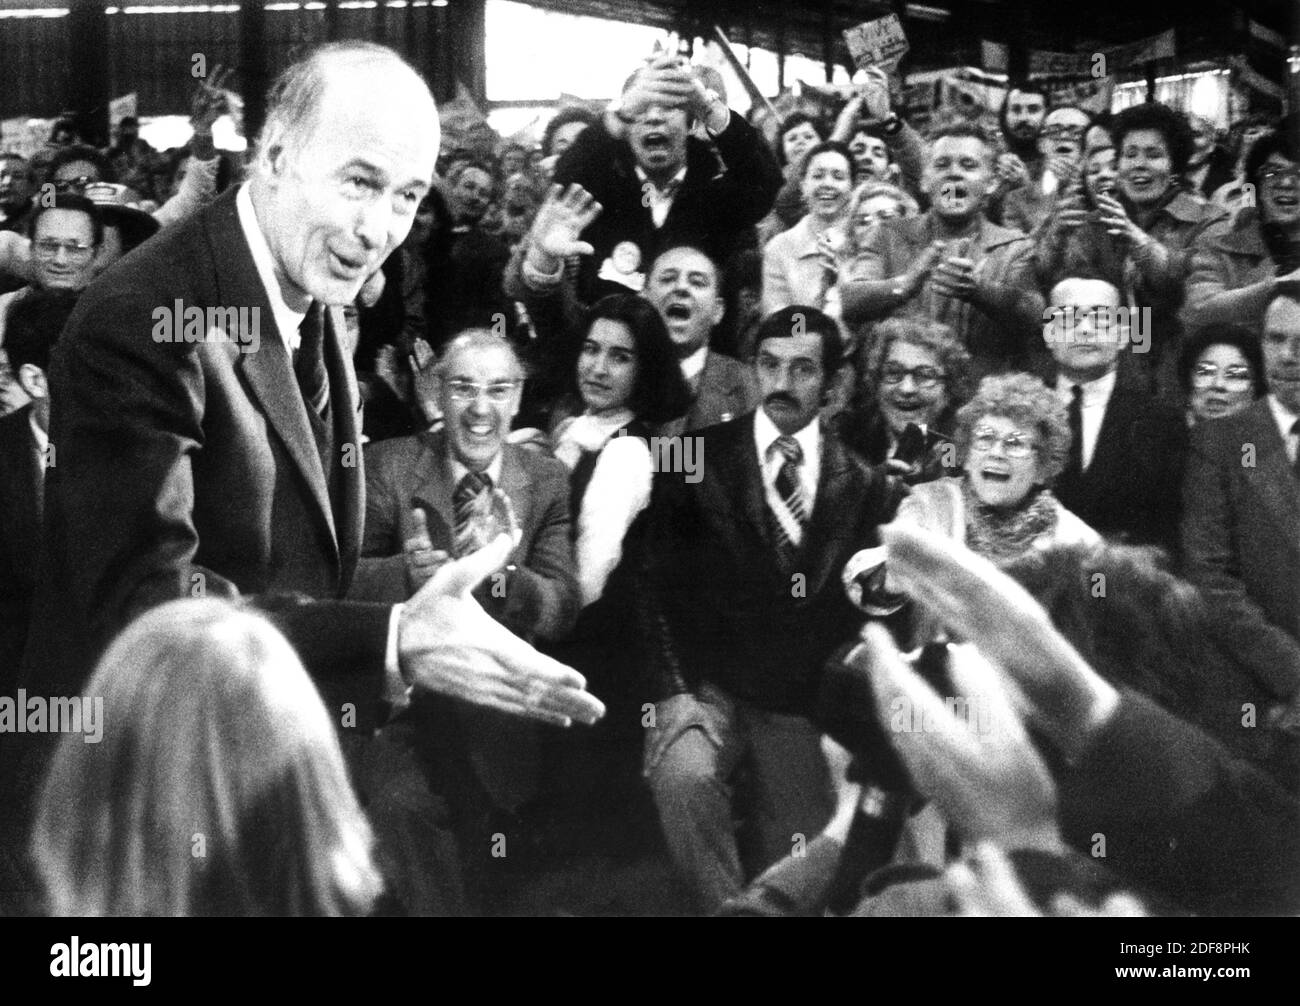 AJAXNETPHOTO. 3RD MAY, 1981. PARIS, FRANCE. - PRESIDENTIAL HOPEFUL - VALÉRY GISCARD D'ESTAING WHO DIED 02 DECEMBER 2020, GETS WARM WELCOME FROM SUPPORTERS AT A RALLY HE ATTENDED.PHOTO:JONATHAN EASTLAND/AJAX REF:810305 1 1 Stock Photo